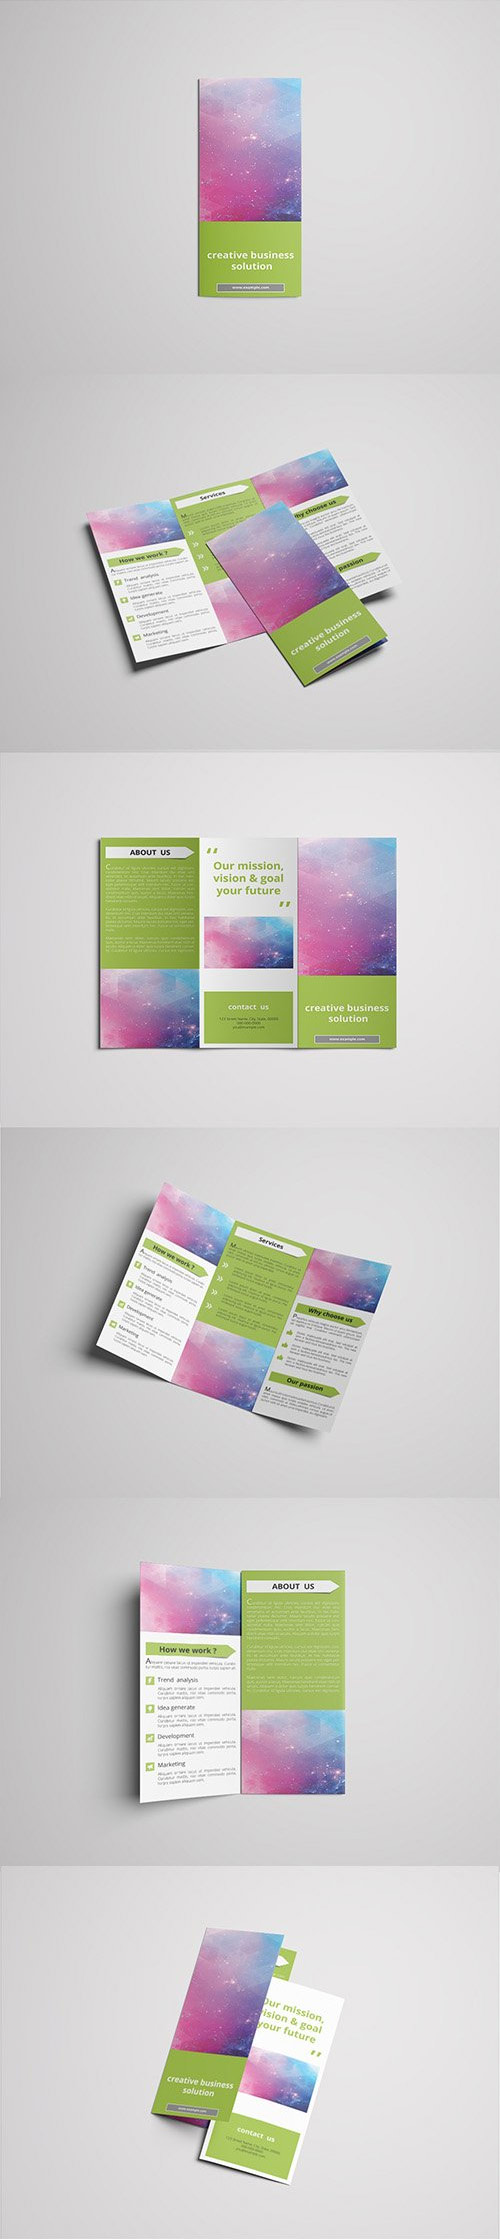 Trifold Brochure Layout with Green Accents 1